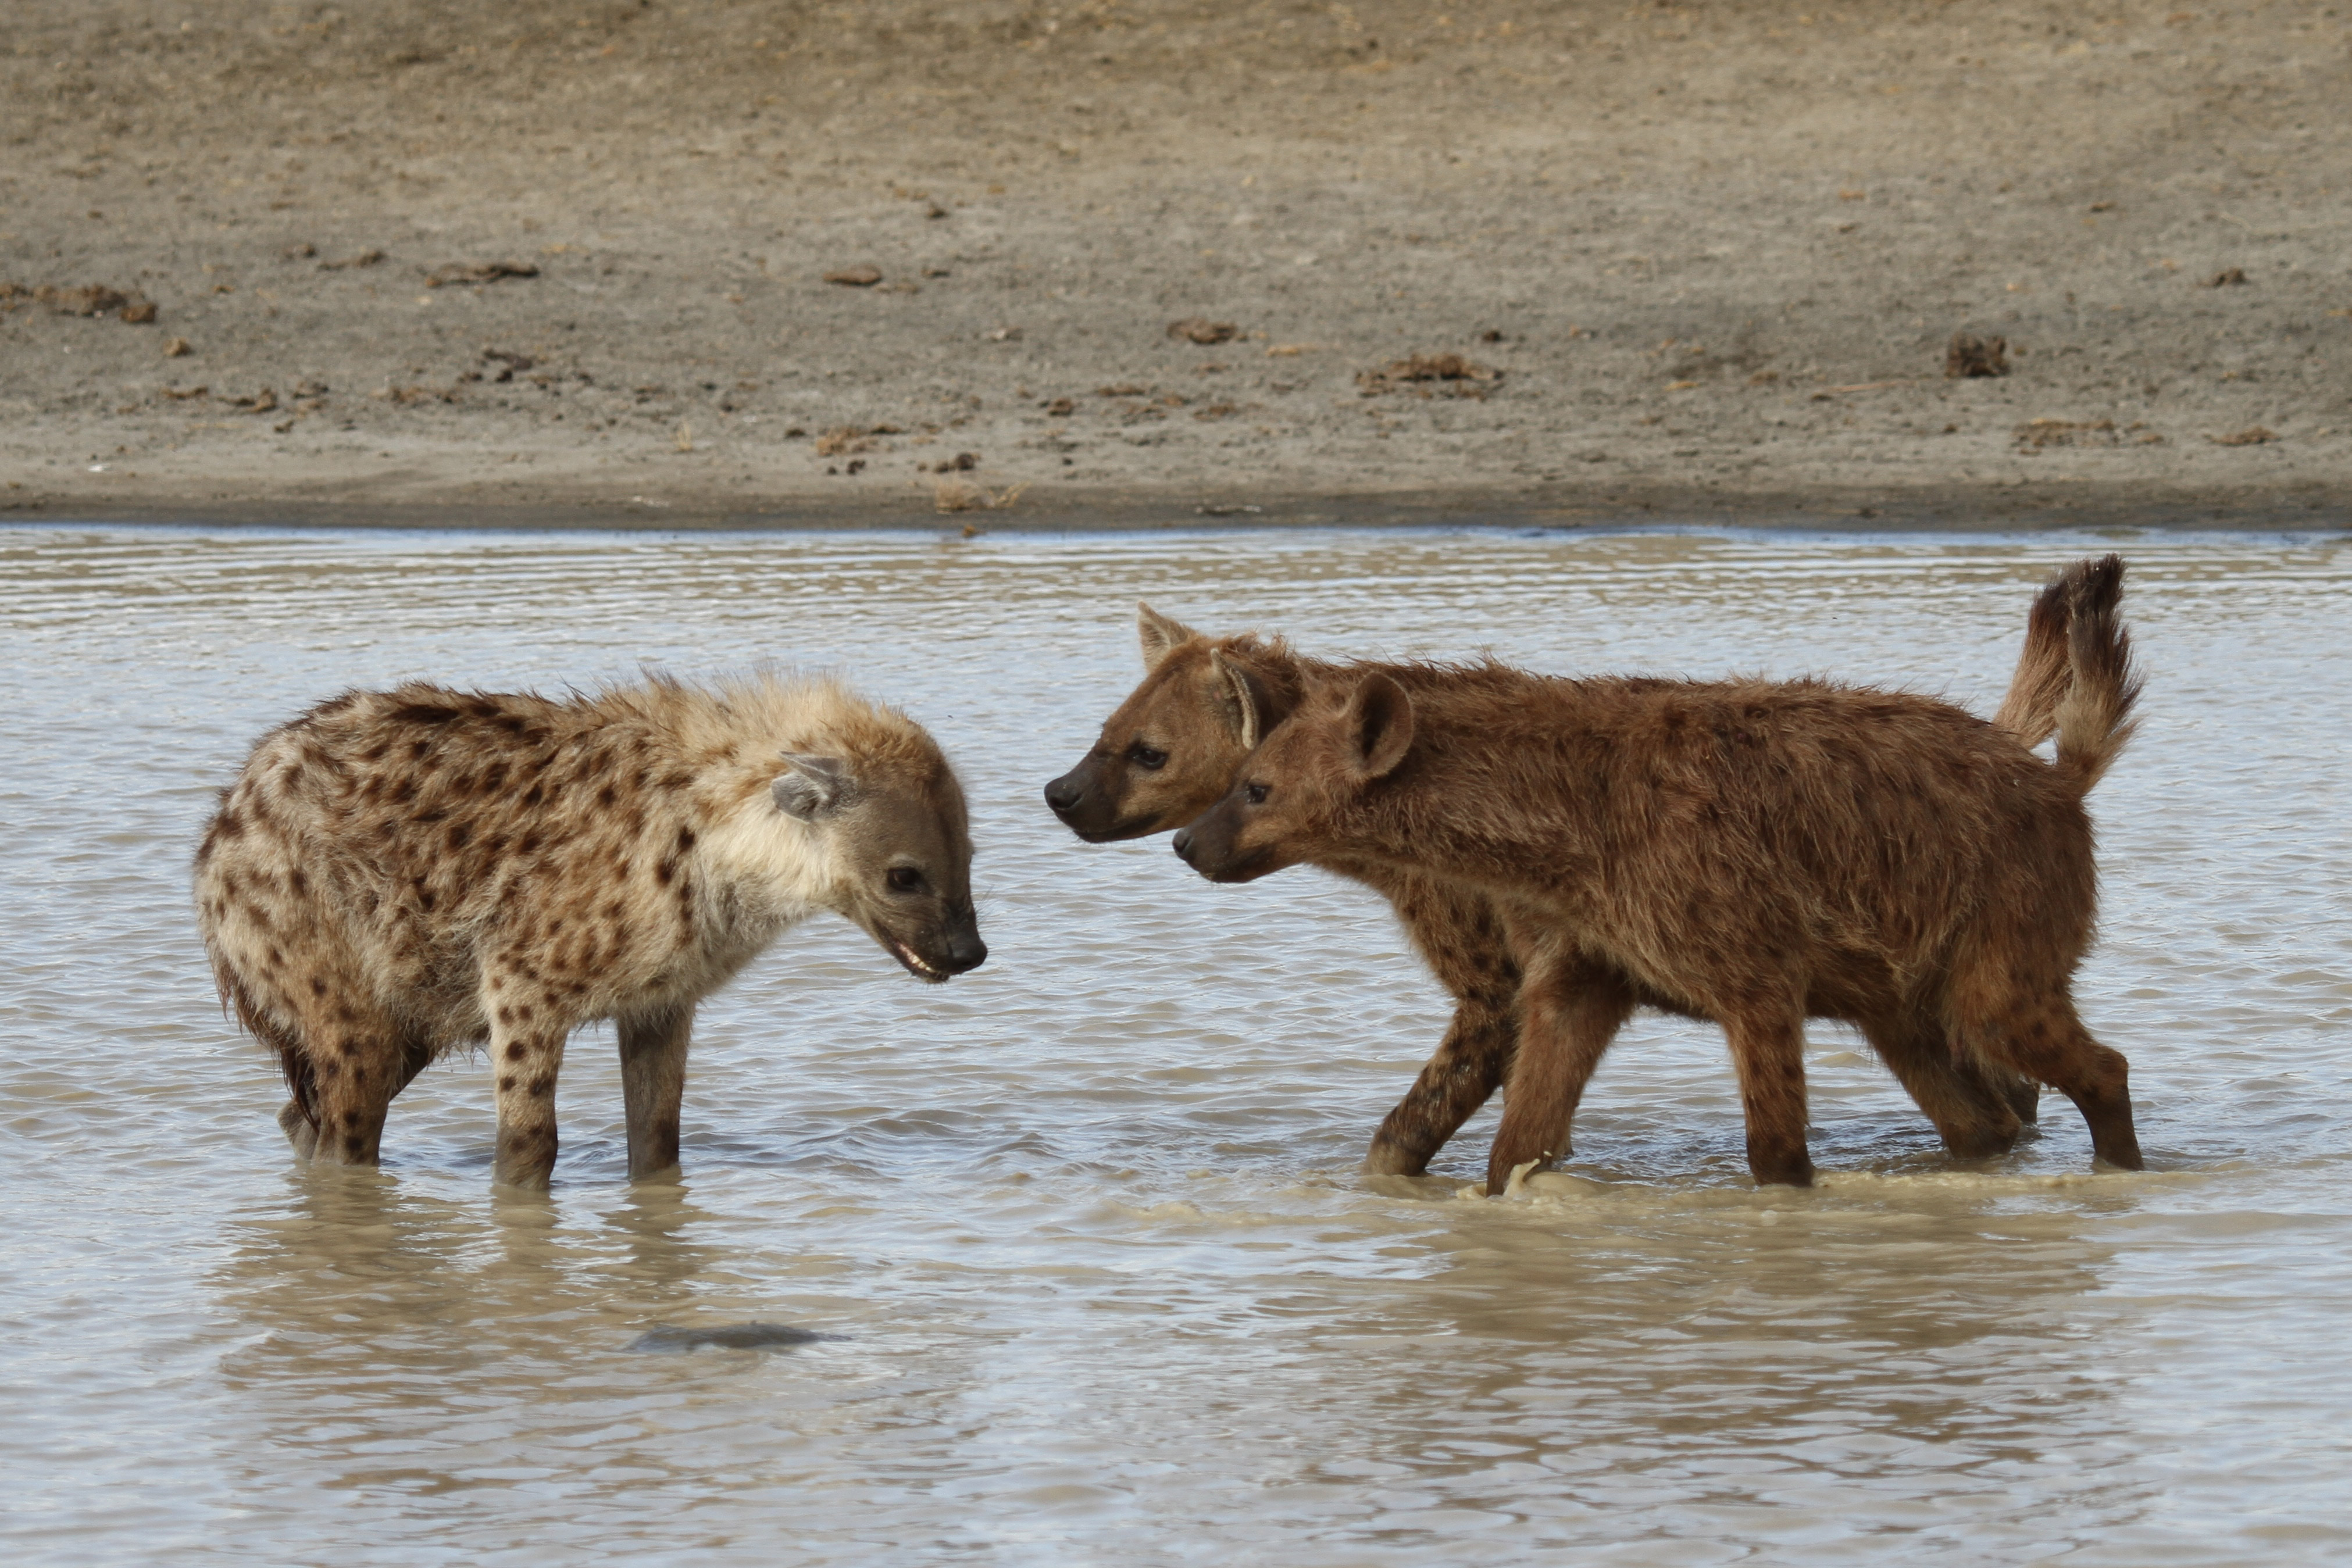 Female social dominance in spotted hyenas: “Stronger together” | CNRS